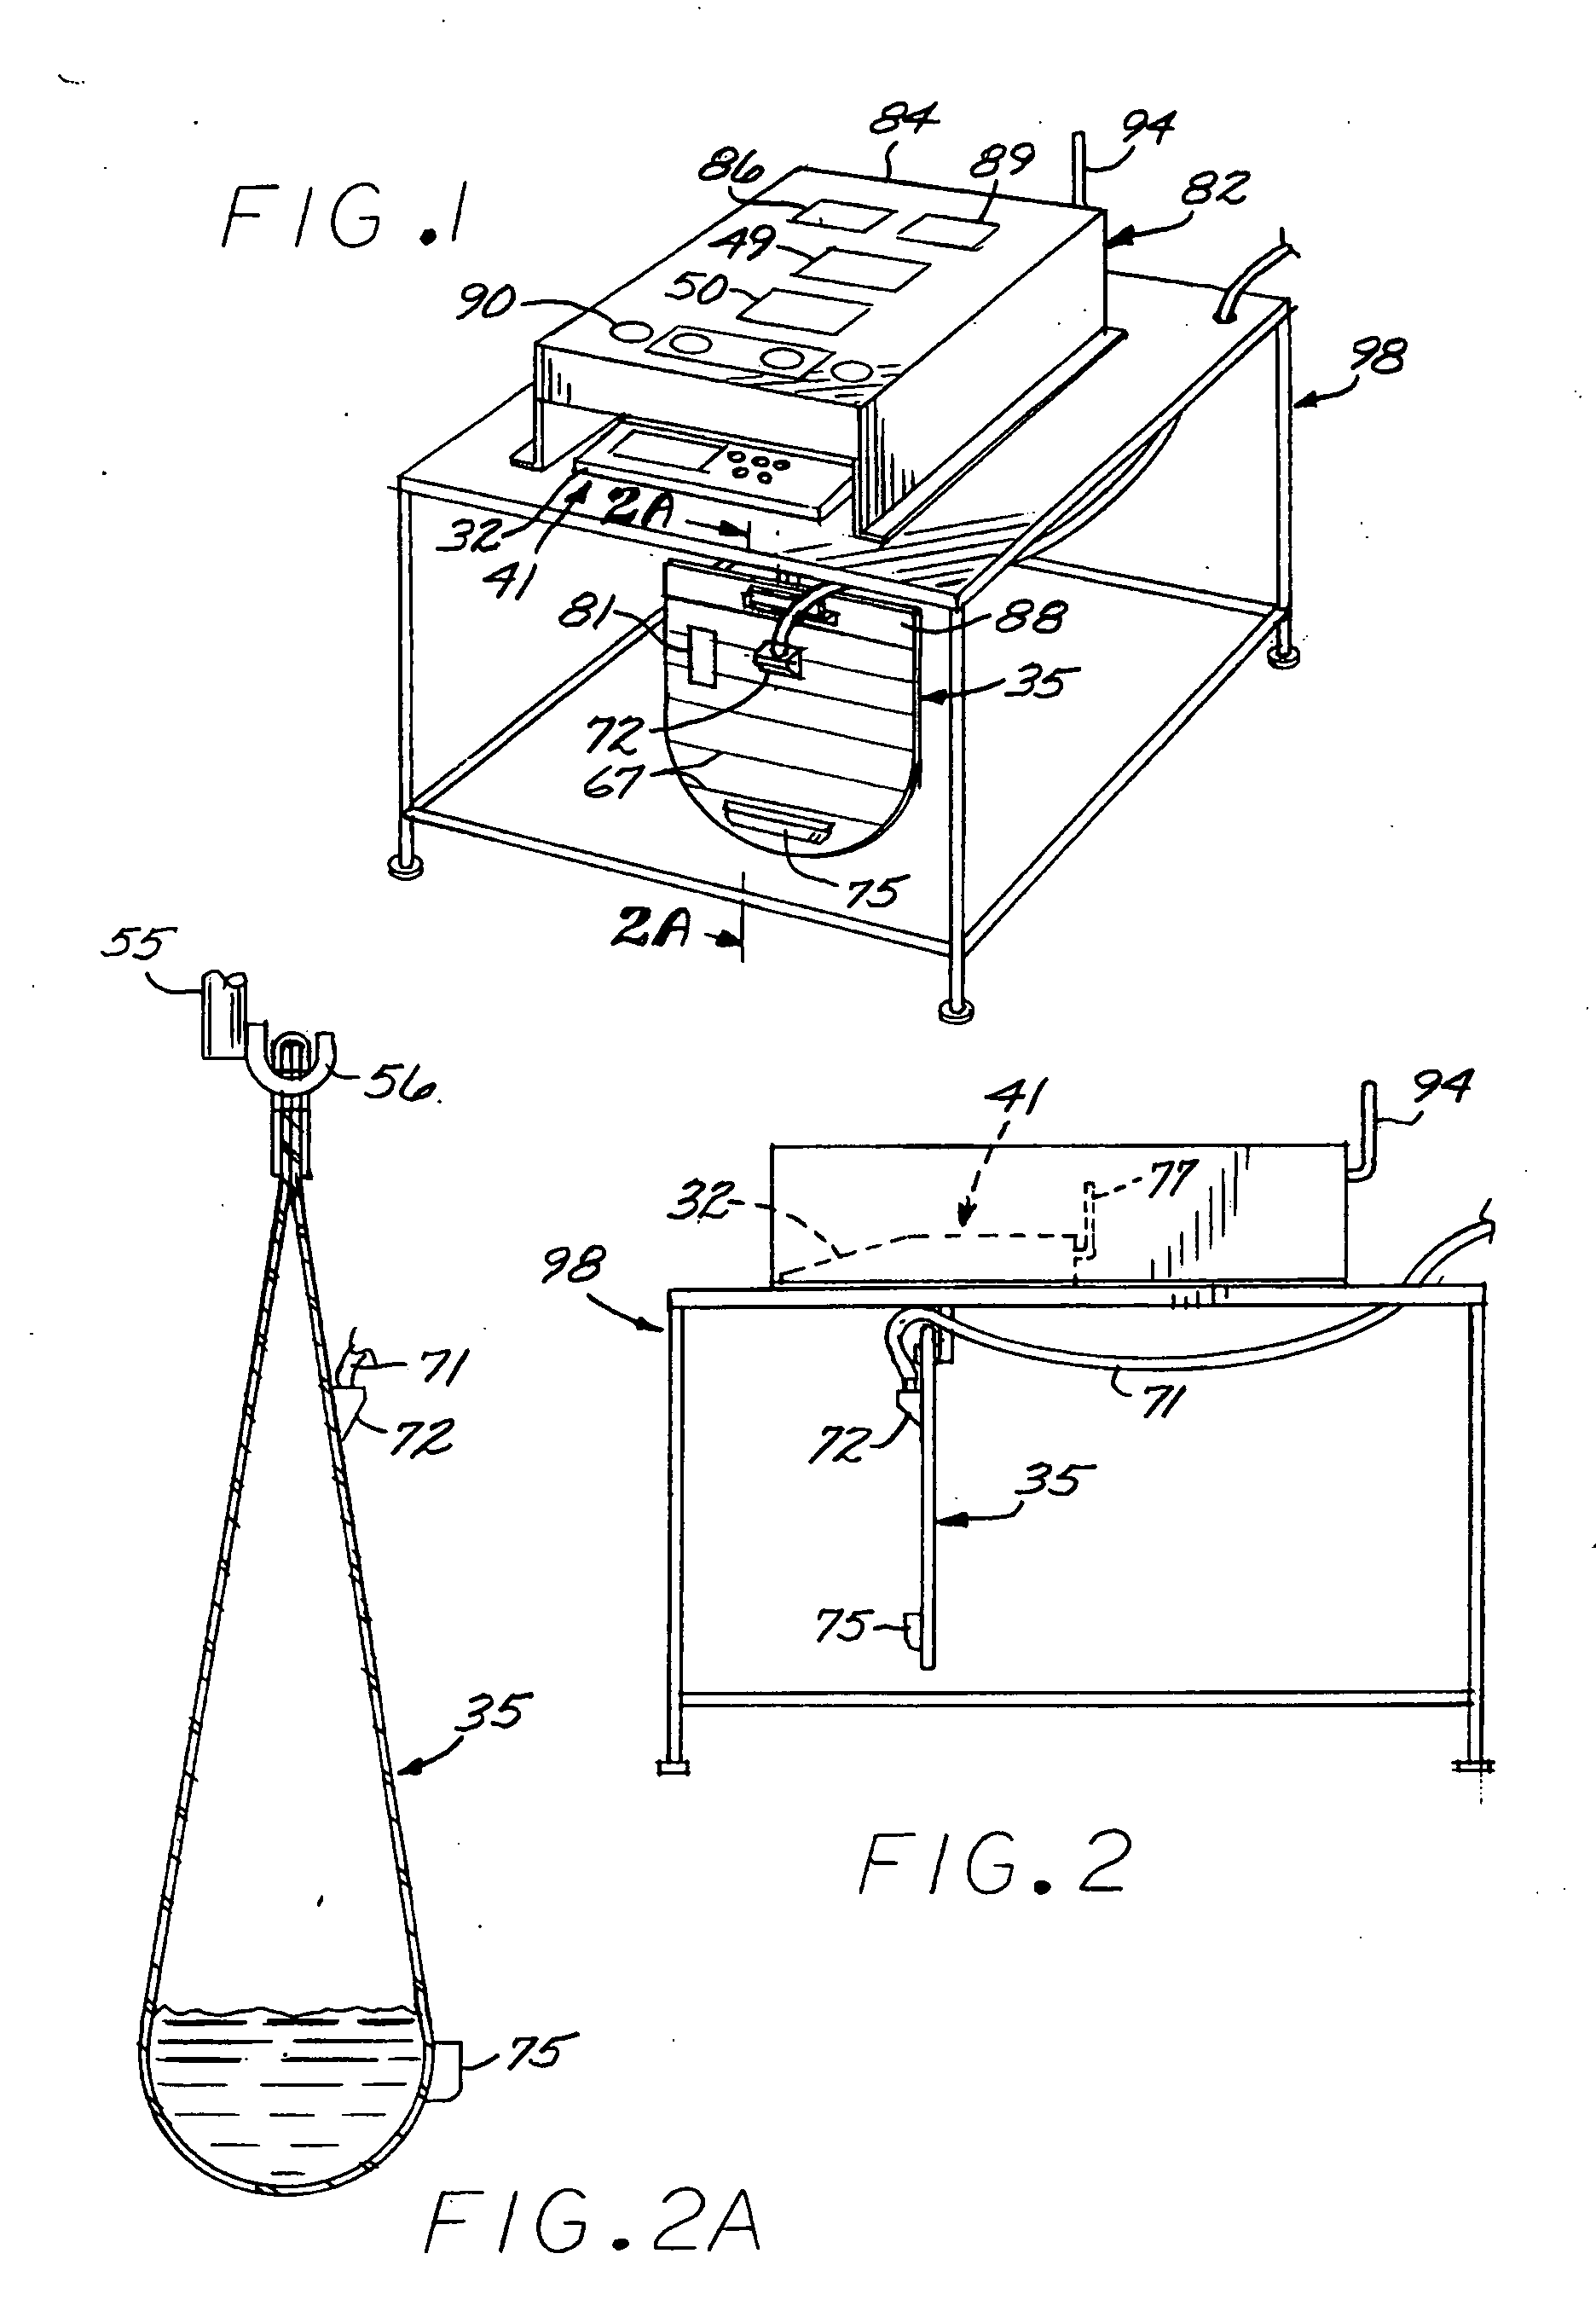 Apparatus for collecting and calculating quantity of patient fluid loss and method of using same